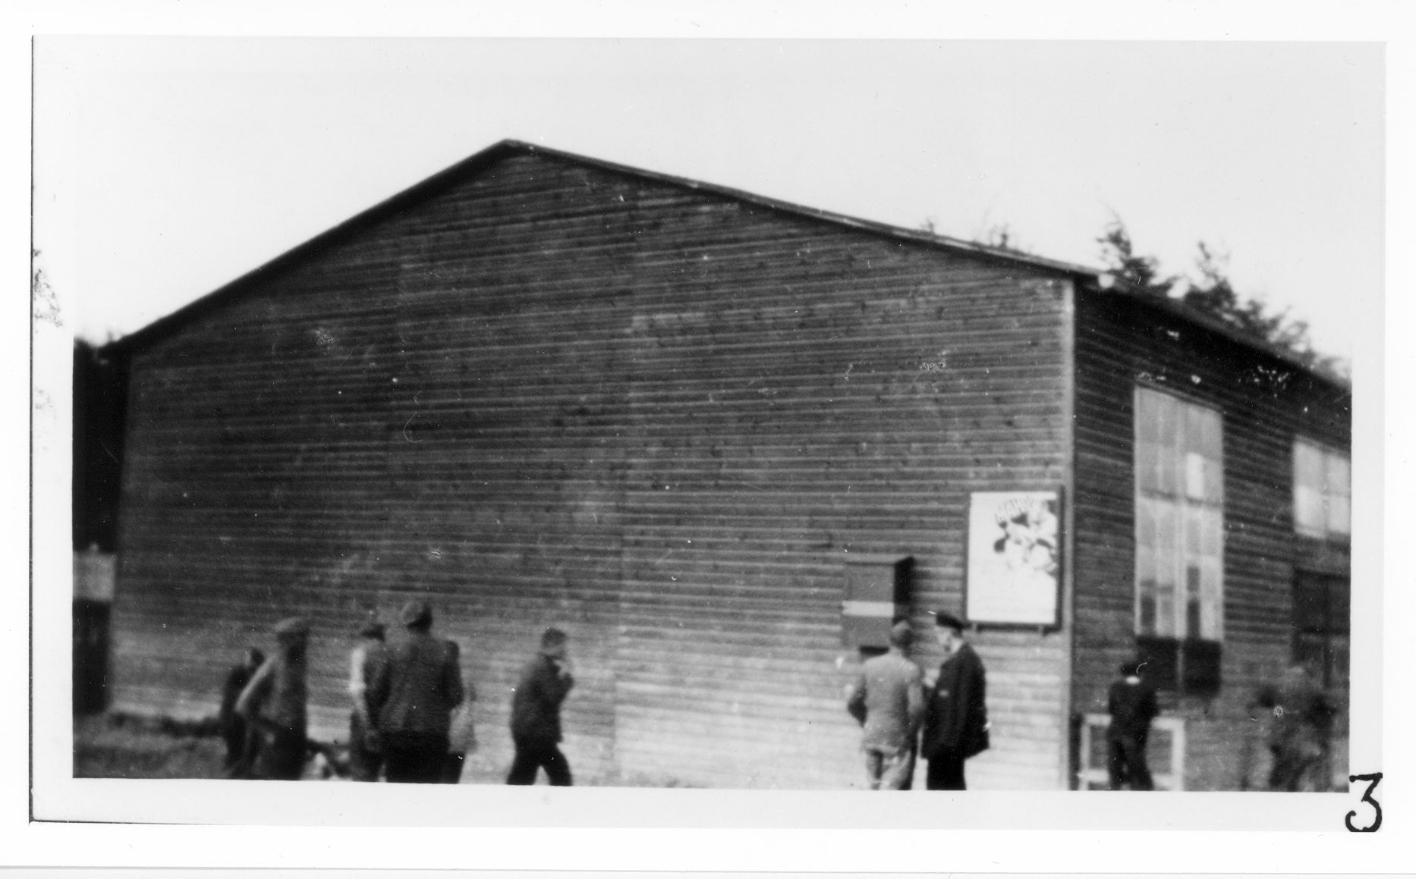 Prisoners in front of the cinema barracks. A film poster hangs on the wall of the barracks on the right.